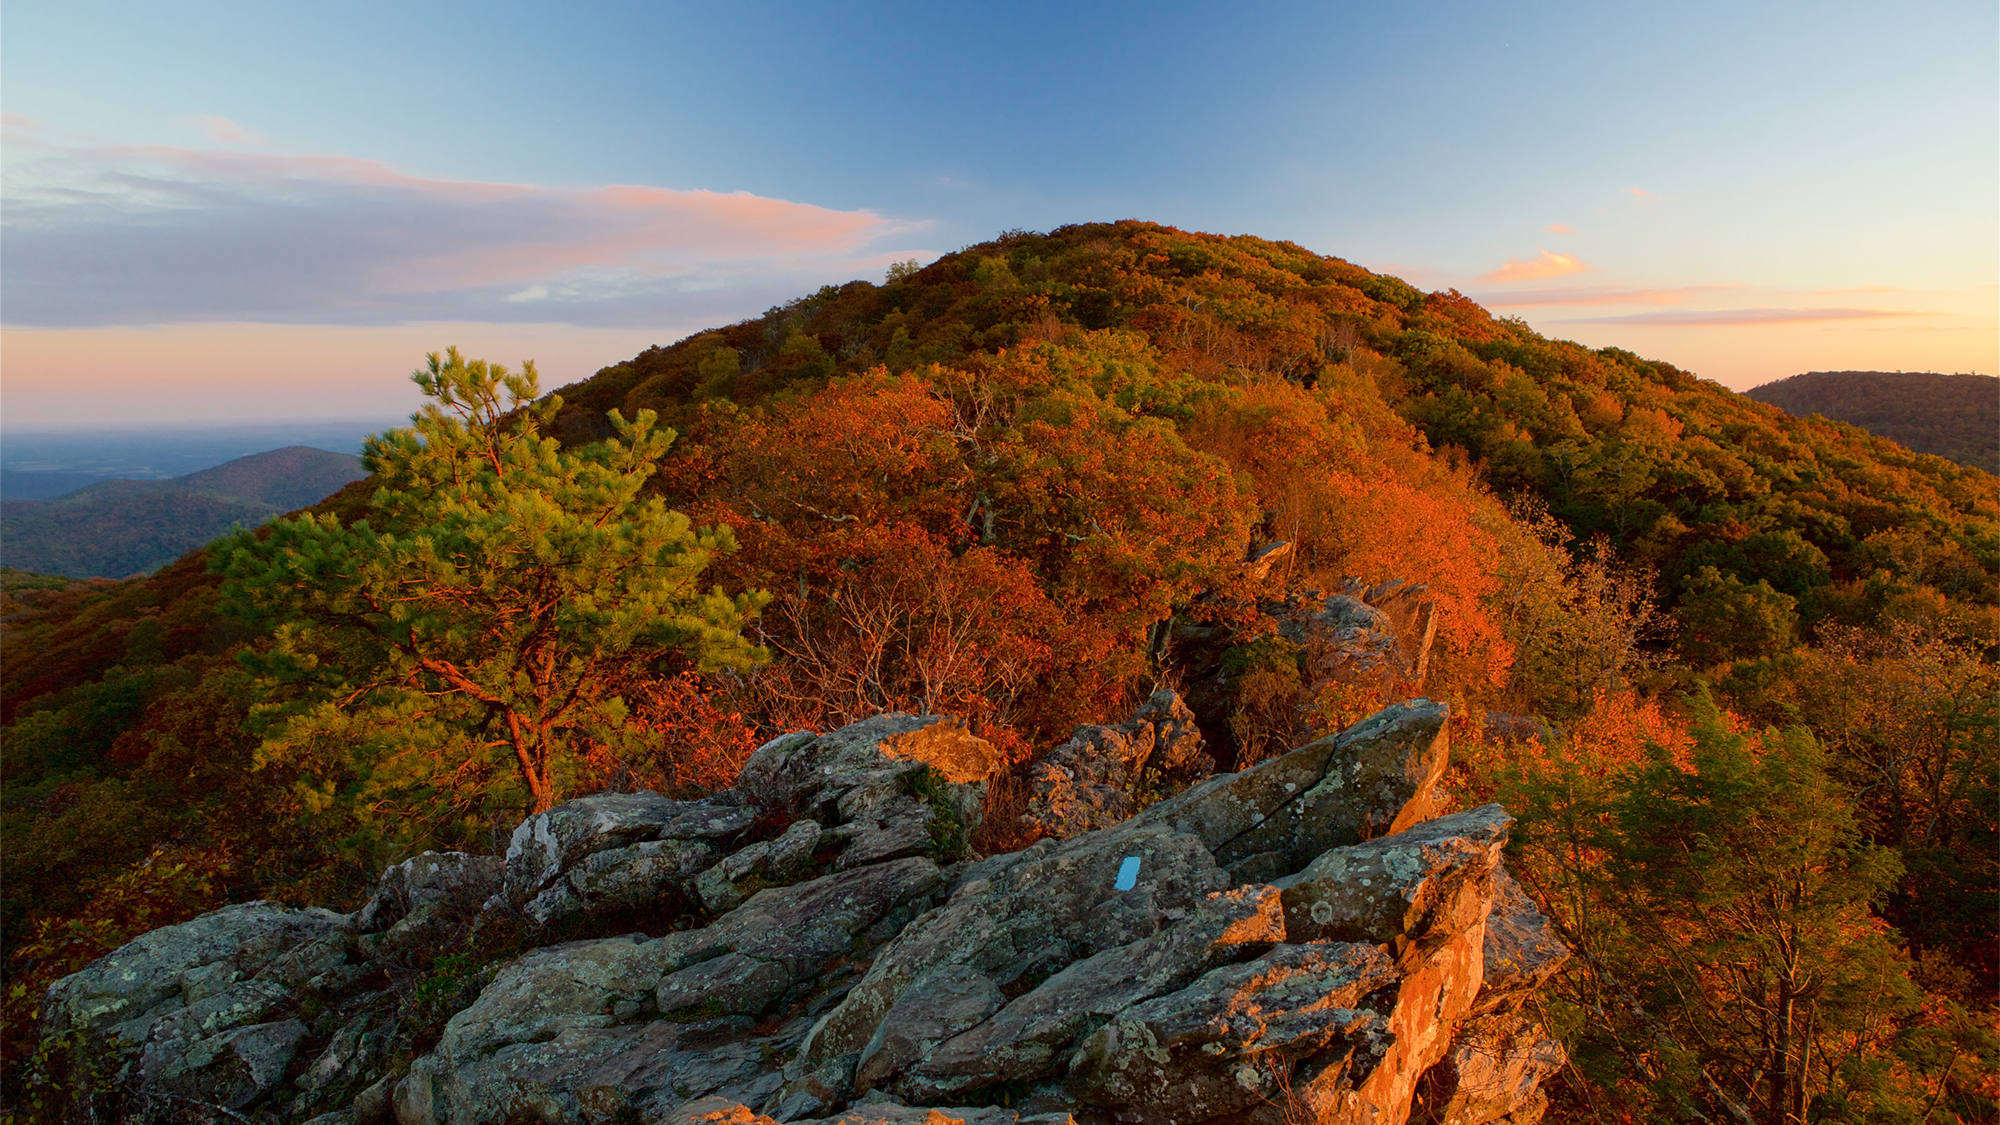 Mountain top view in Shenandoah National Park in the fall